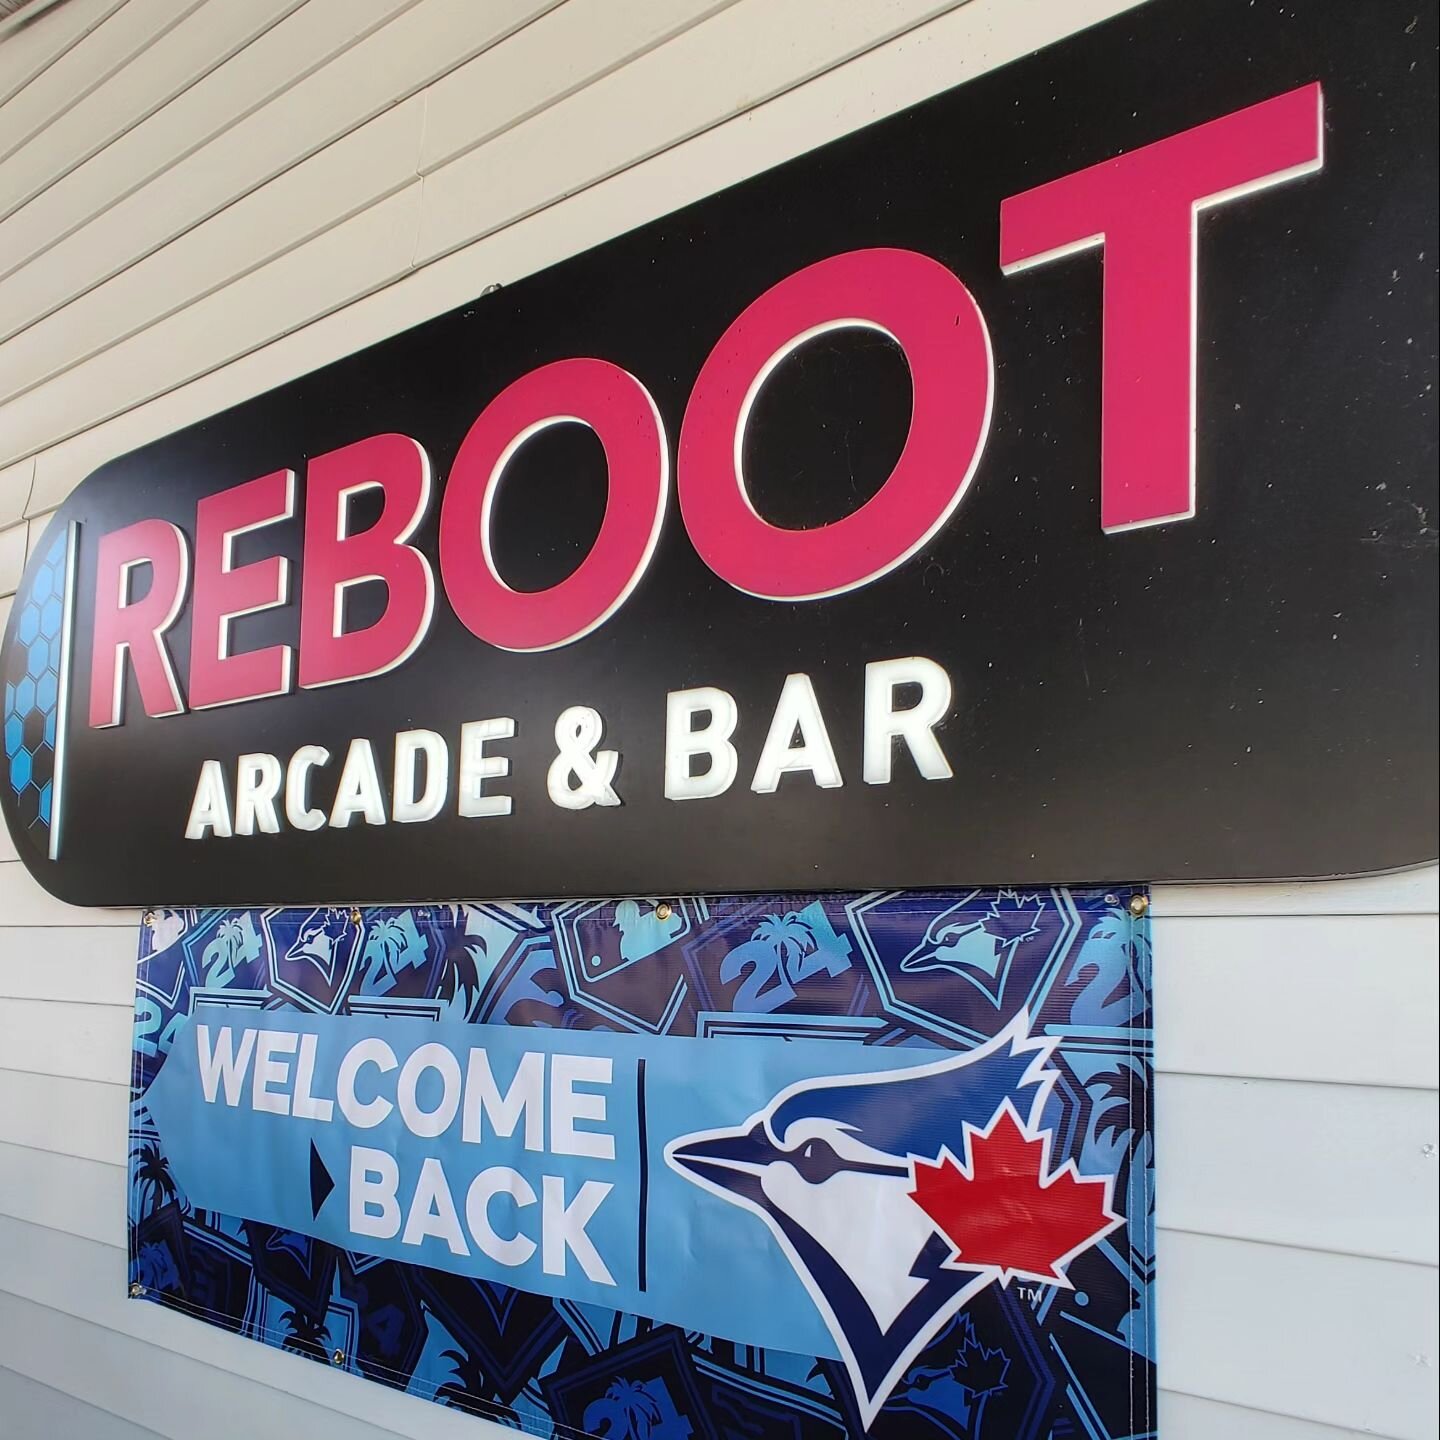 Reboot welcomes back The Toronto Blue Jays for Spring Training.  After the each game come enjoy some nostalgia with our retro arcade, pinball and gaming atmosphere.

@bluejays @dunedinbluejays @dunedinmerchants @dunedindowntownmarket @dunedinisawesom